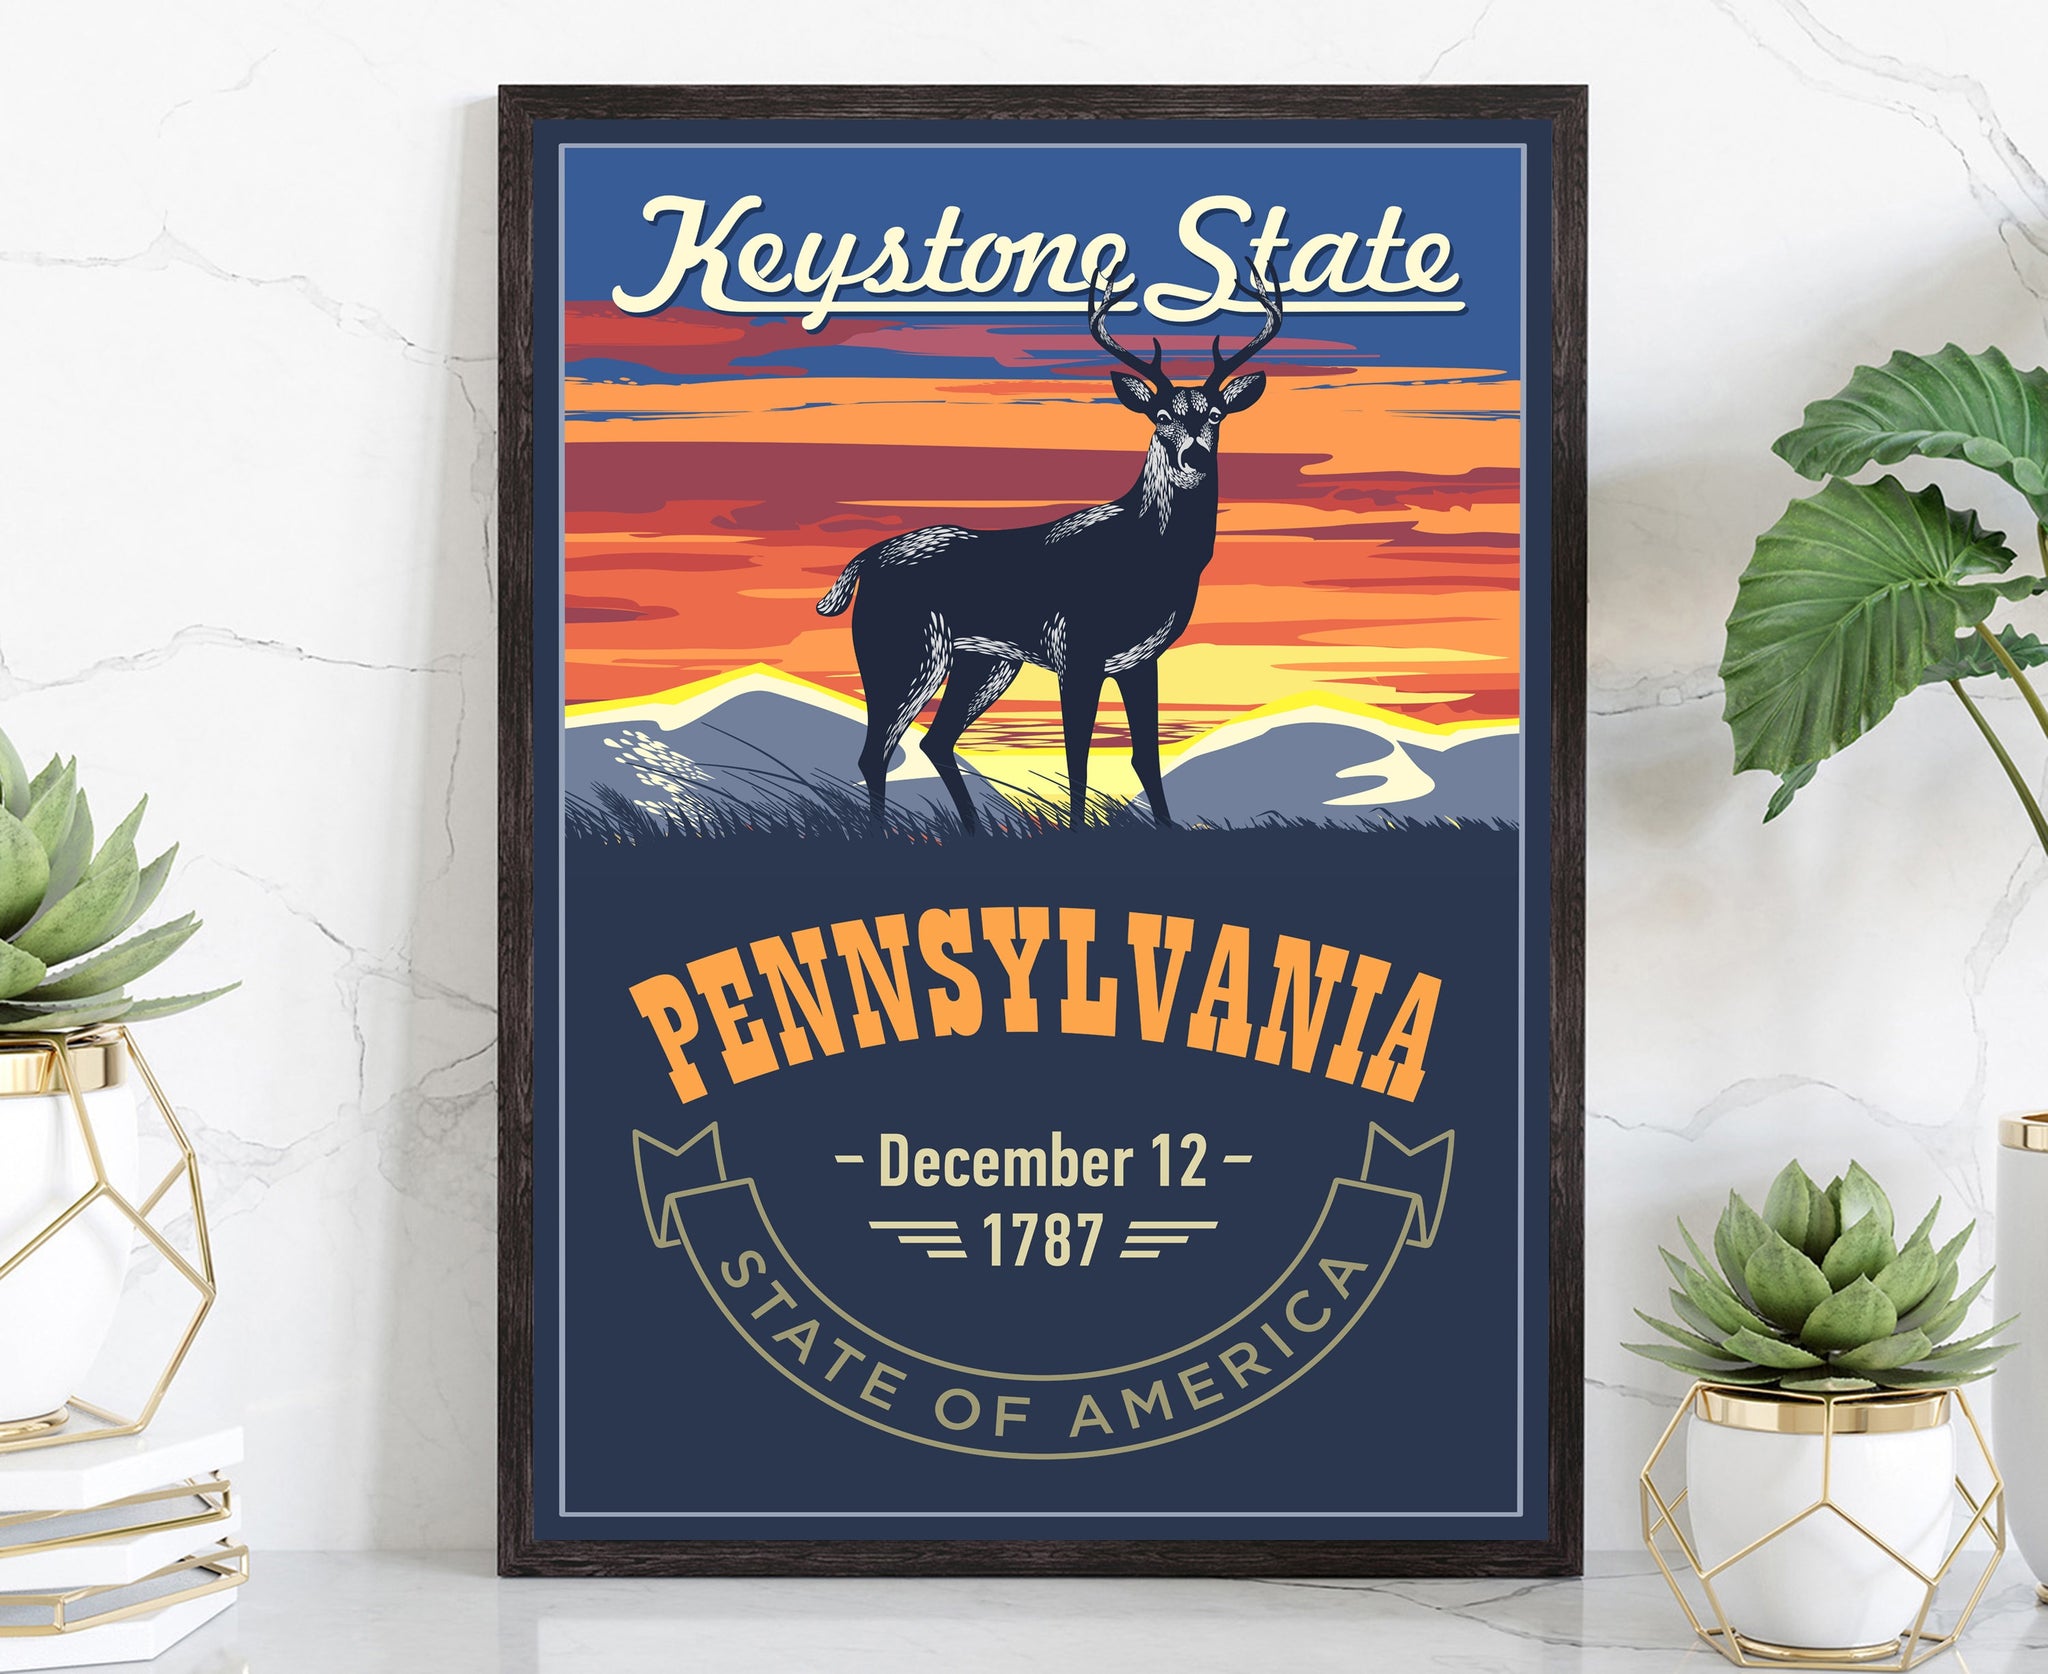 United States Poster, Pennsylvania State Poster Print, Pennsylvania State Emblem Poster, Retro Travel State Poster, Home Office Wall Art